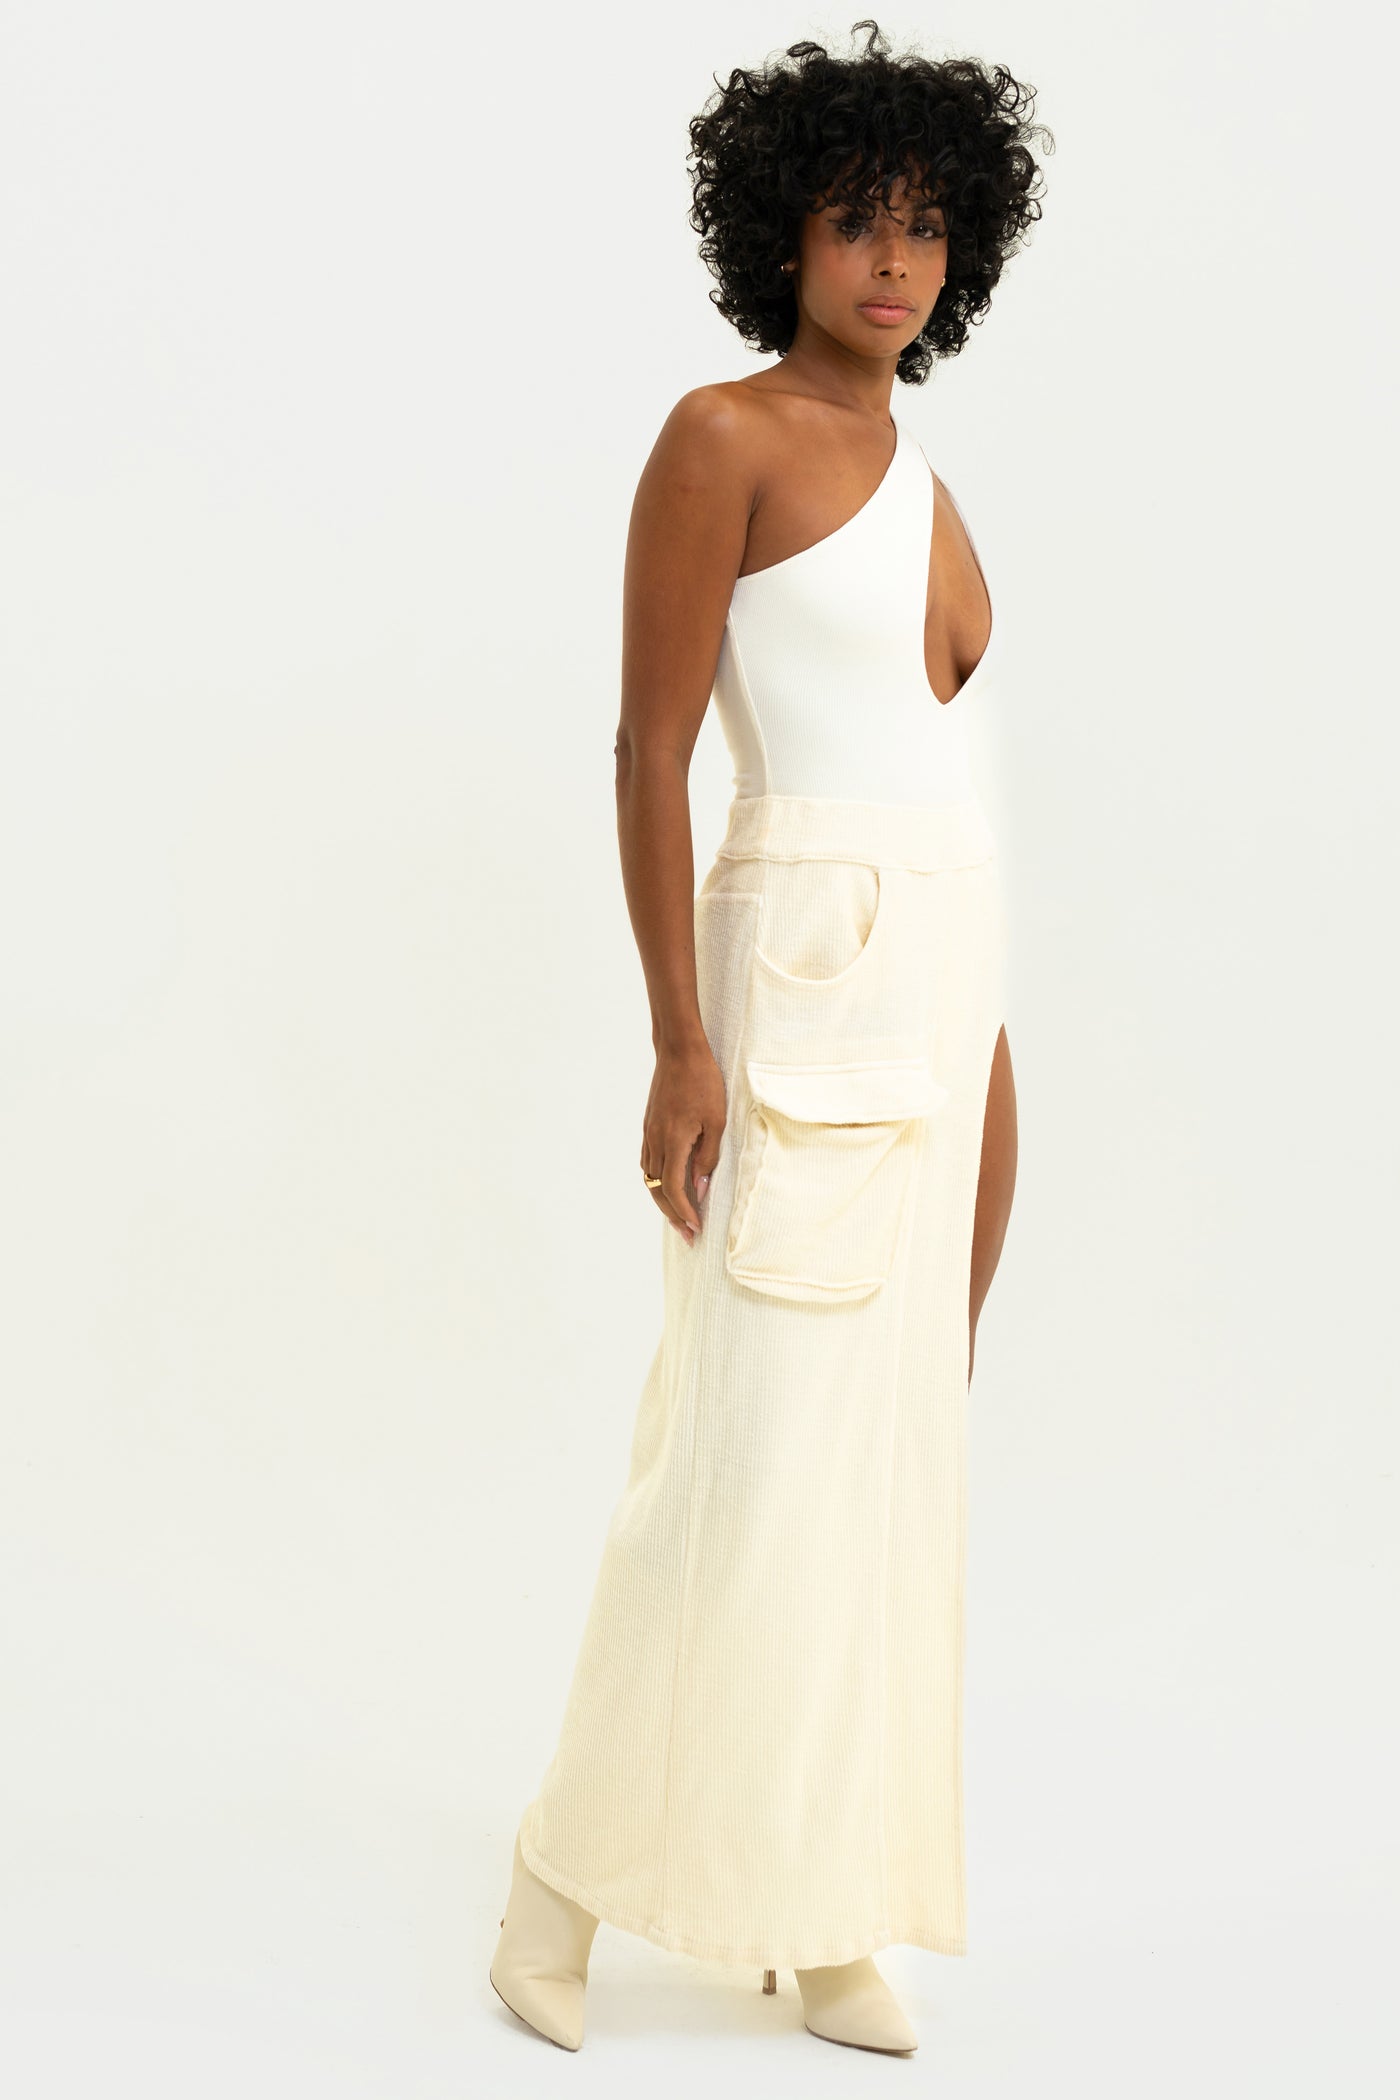 Model showcasing the White Aspen Cargo Skirt with unique cargo pocket, high leg slit, in comfortable corded terry.